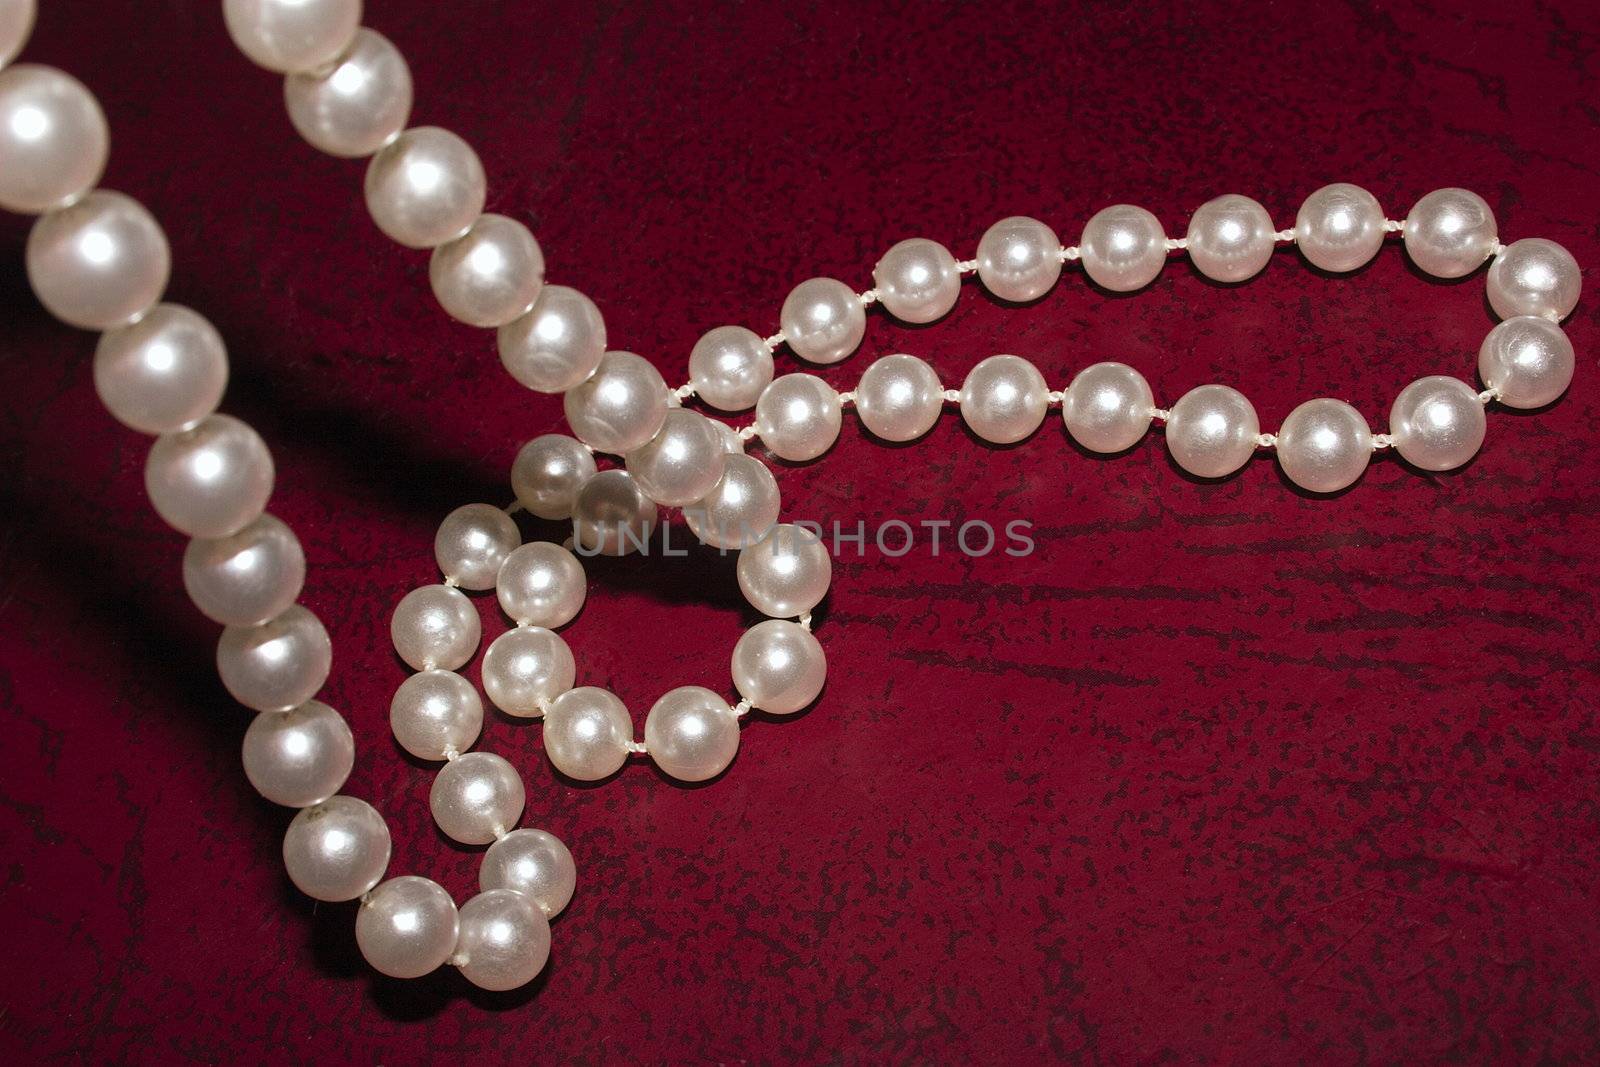 luxurious pearl necklace on a leather background